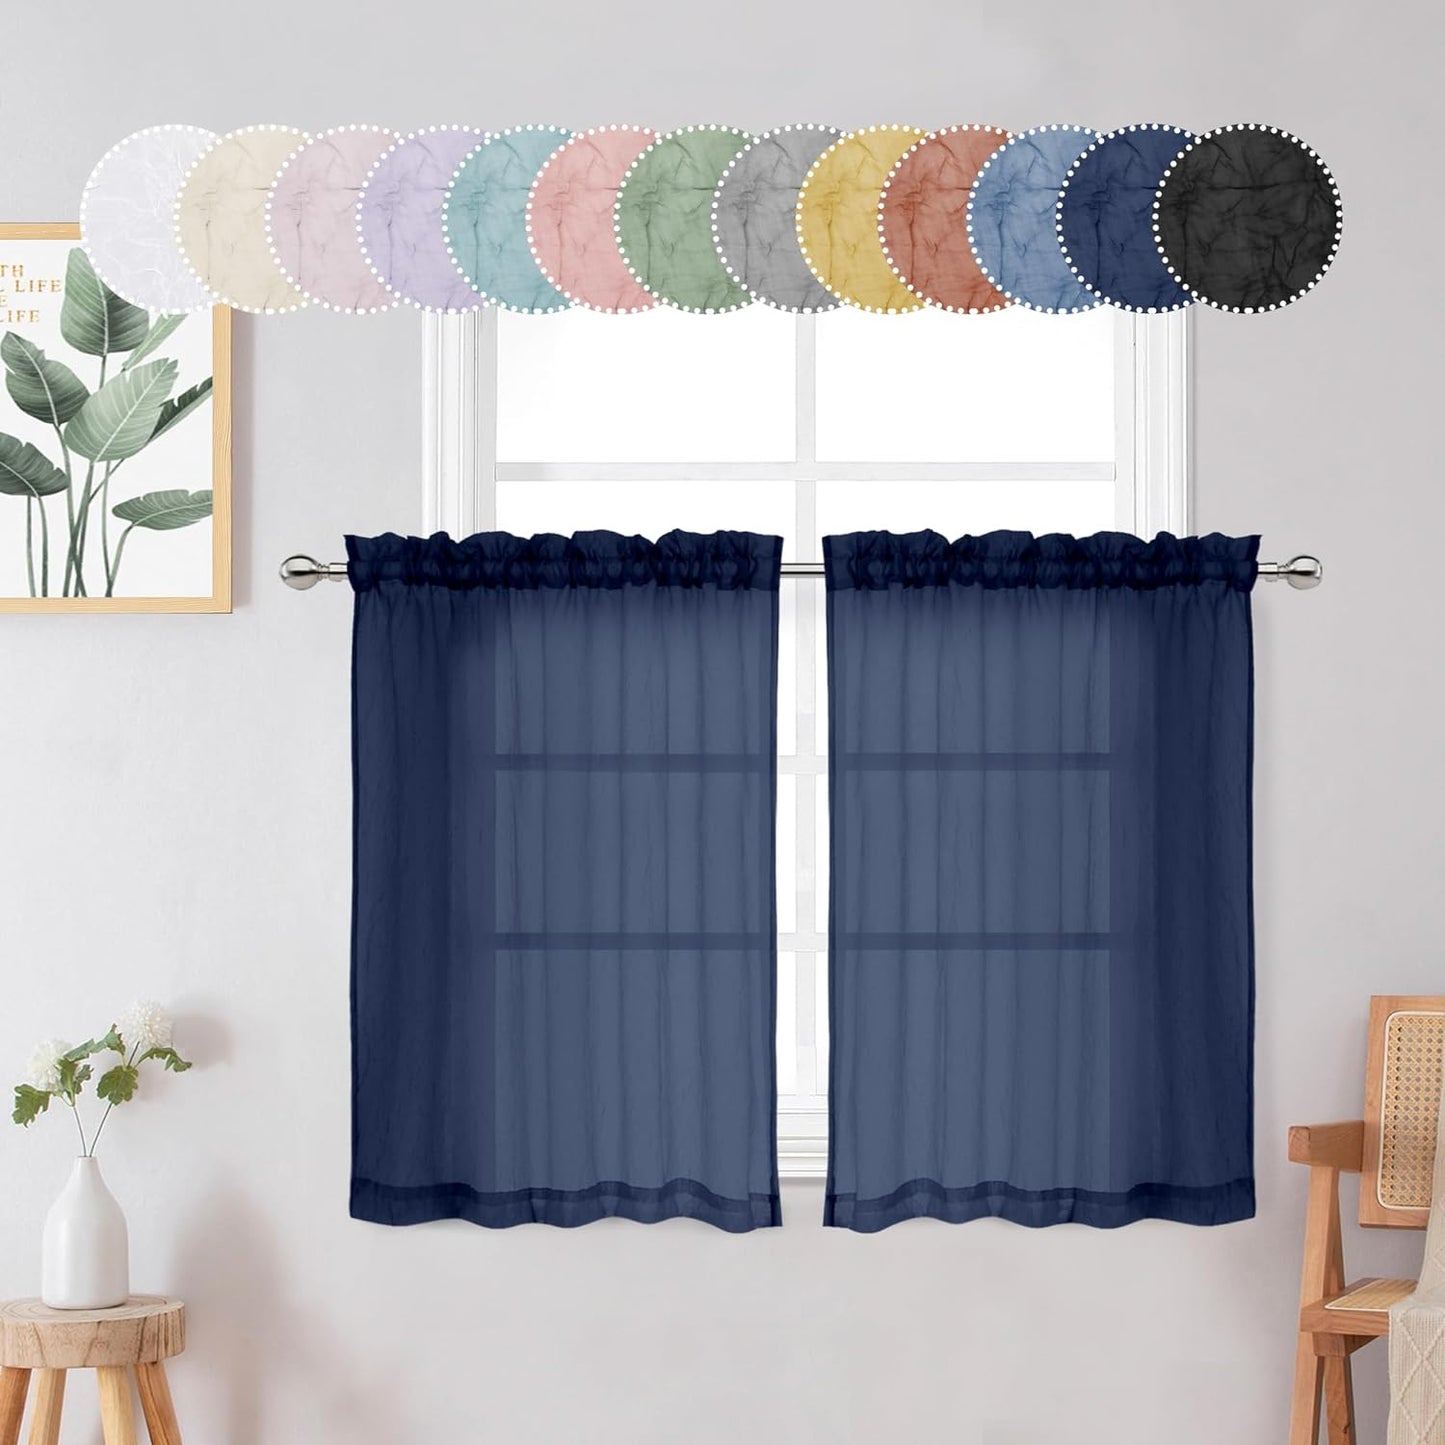 Chyhomenyc Crushed White Sheer Valances for Window 14 Inch Length 2 PCS, Crinkle Voile Short Kitchen Curtains with Dual Rod Pockets，Gauzy Bedroom Curtain Valance，Each 42Wx14L Inches  Chyhomenyc Navy Blue 28 W X 36 L 